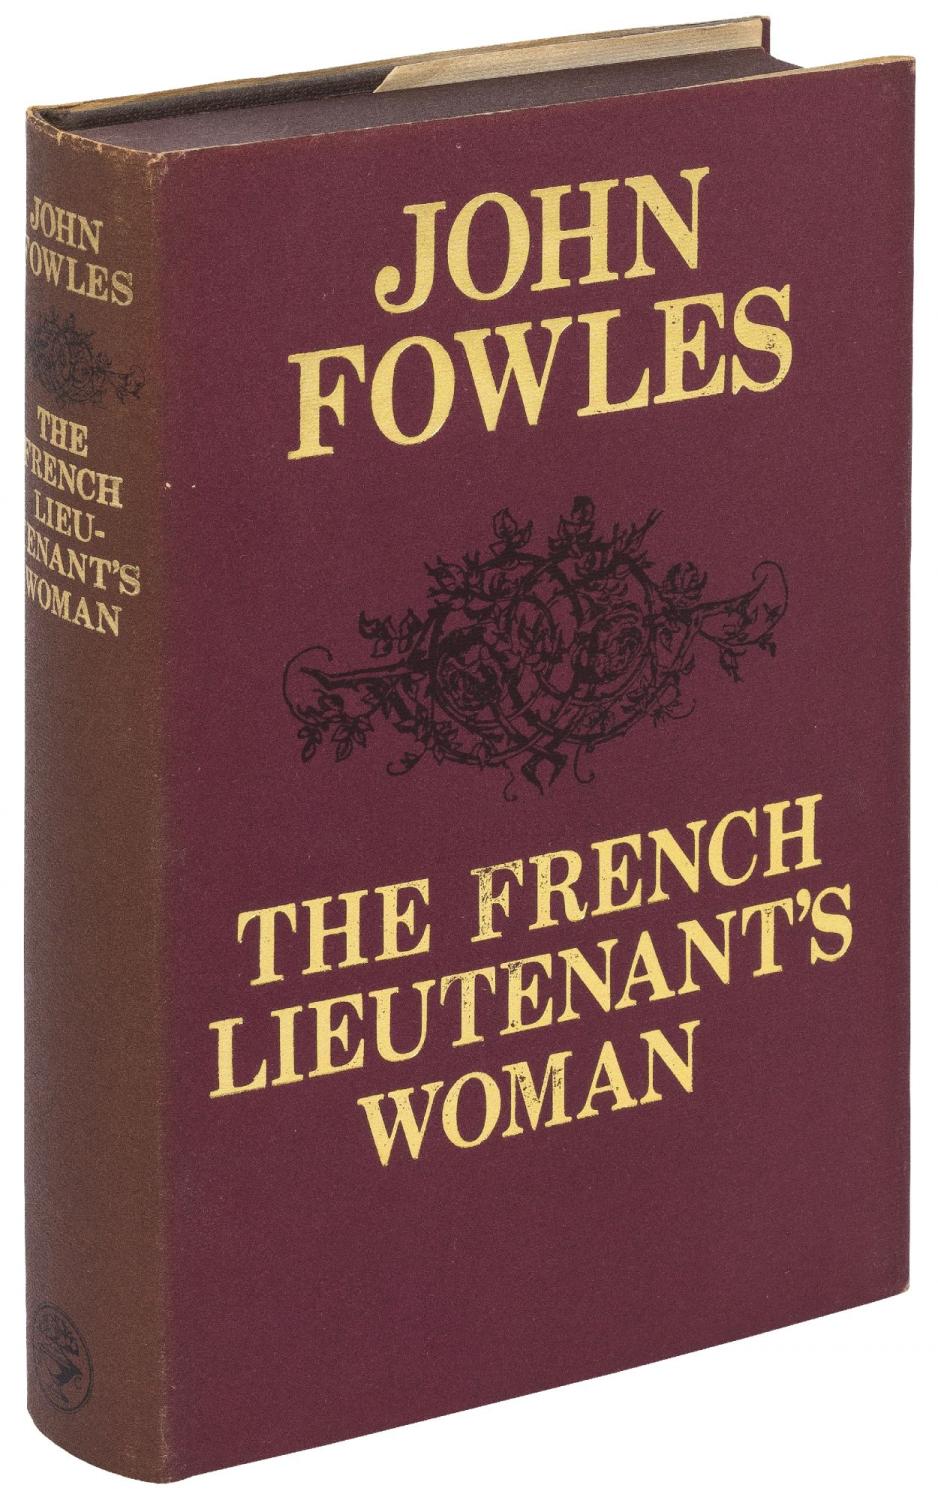 book review the french lieutenant's woman